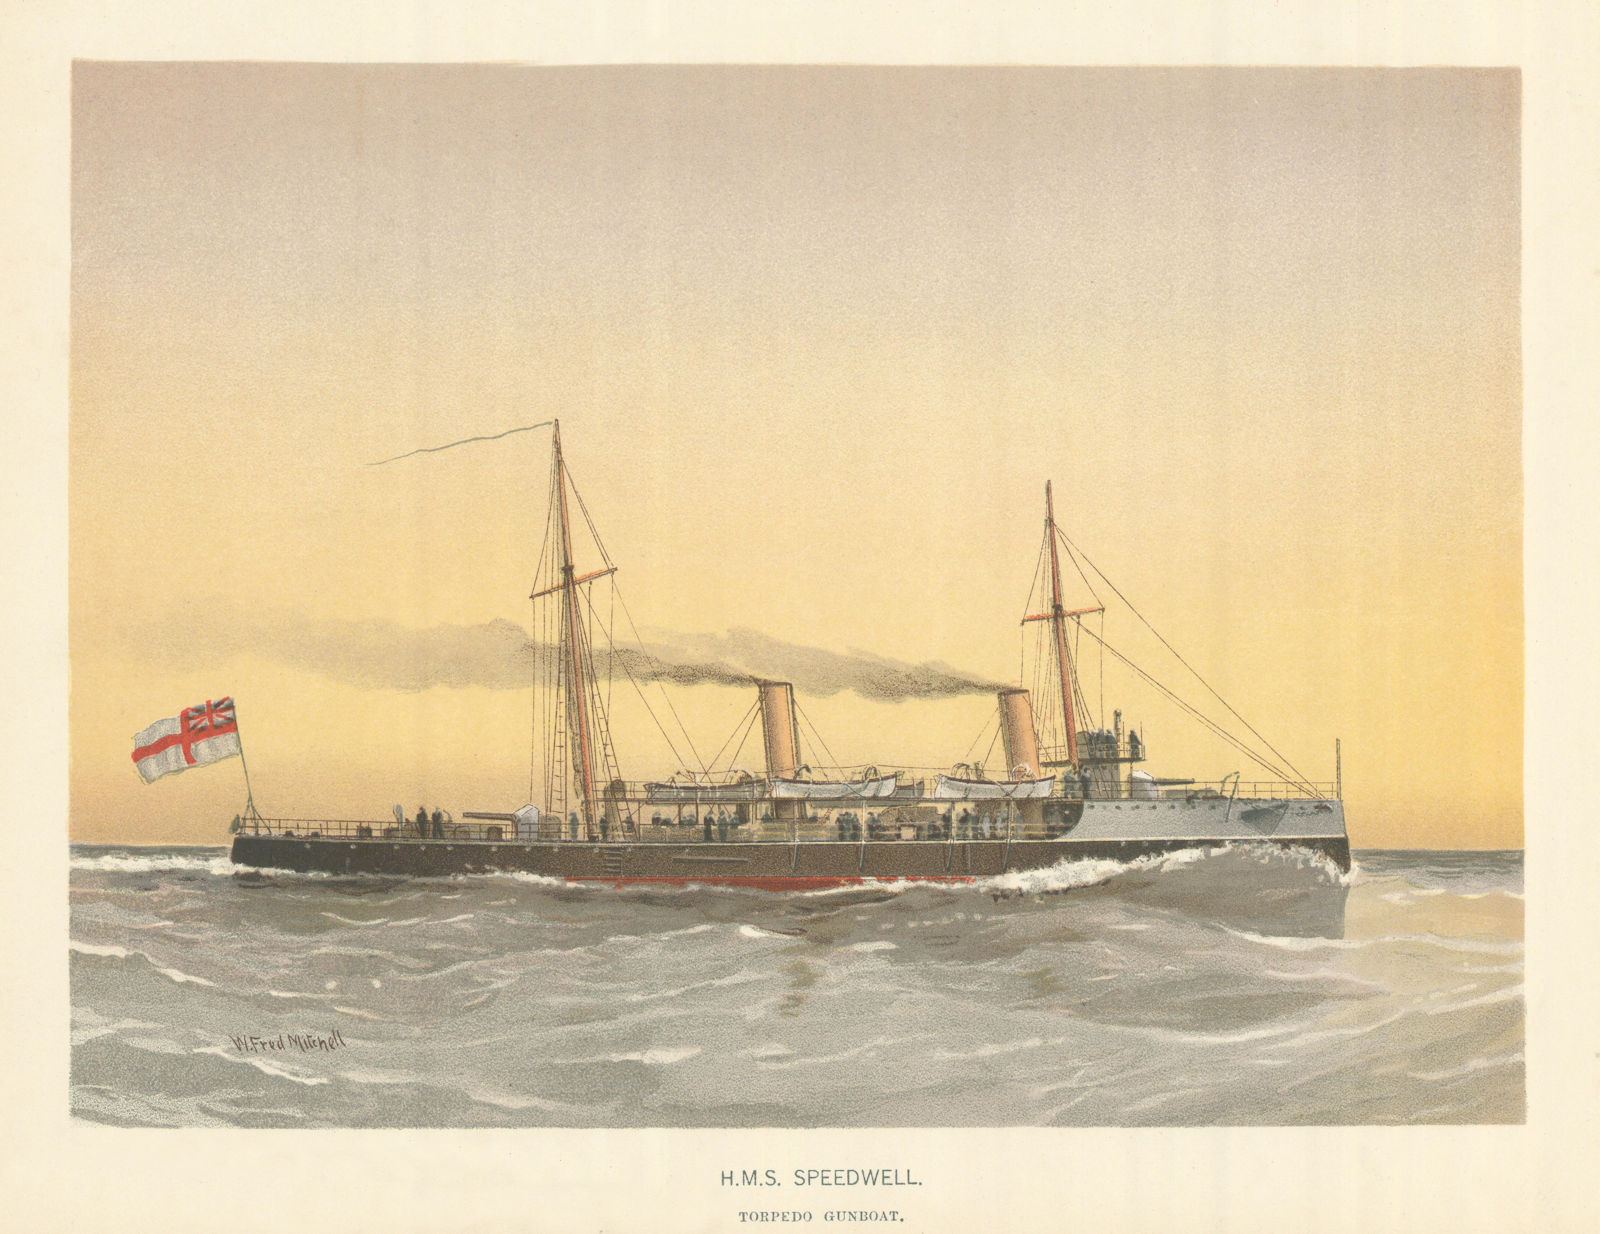 Associate Product H.M.S. "Speedwell" - torpedo gunboat (1889) by W.F. Mitchell. Royal Navy 1893